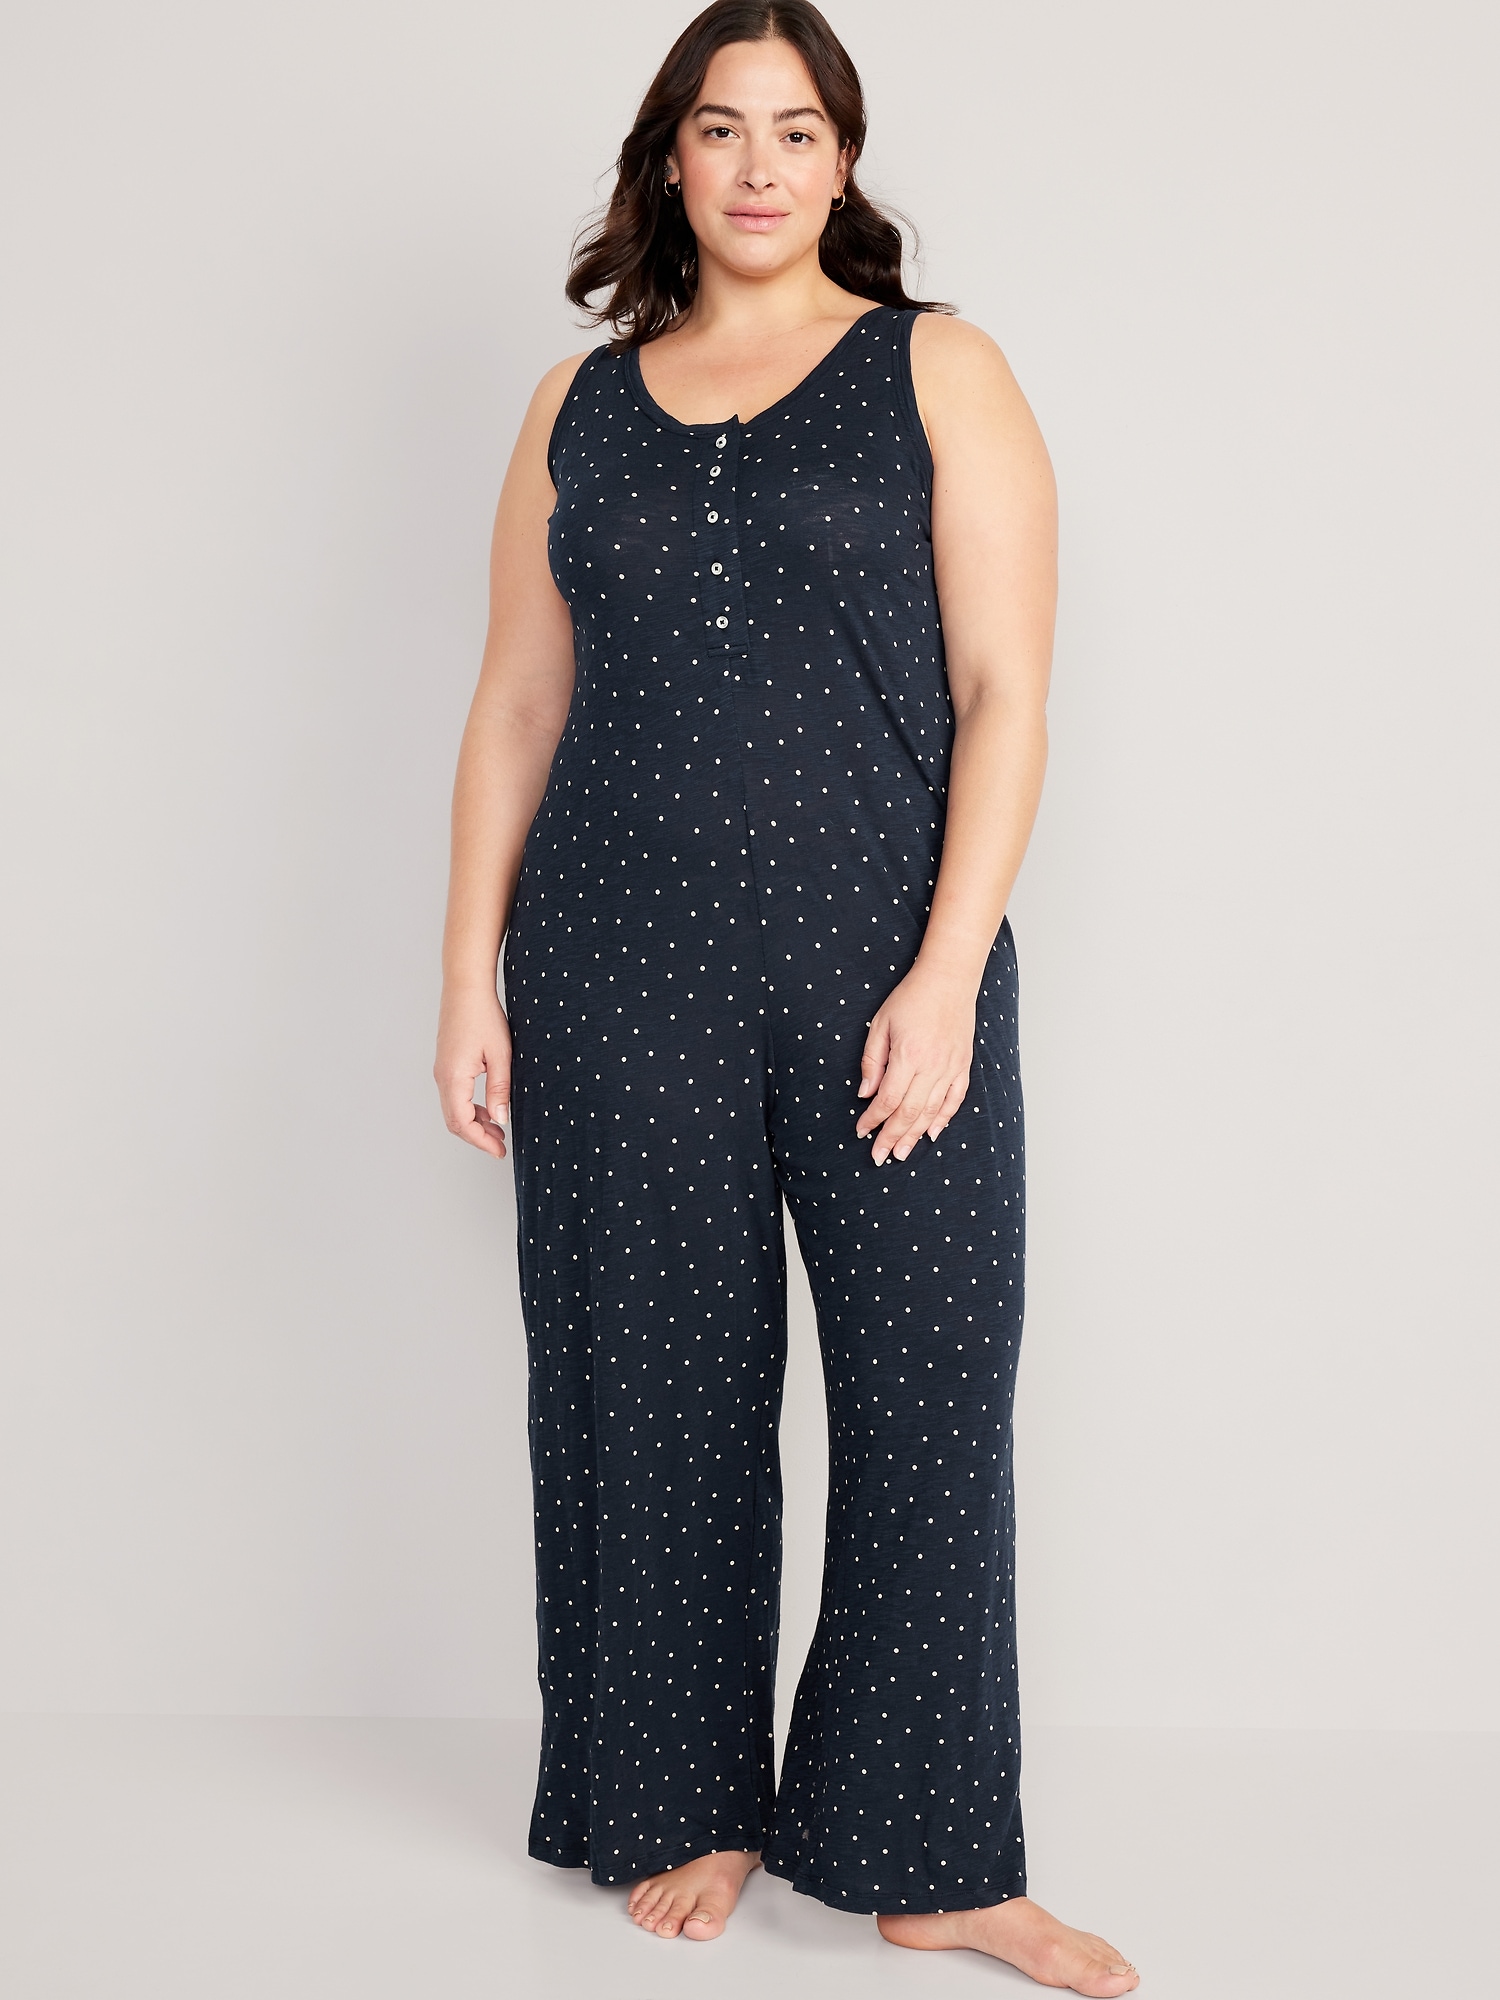 Lily Brown & White Polka Dot Gathered Sleeveless Wide-Leg Jumpsuit - Women  & Plus | Best Price and Reviews | Zulily